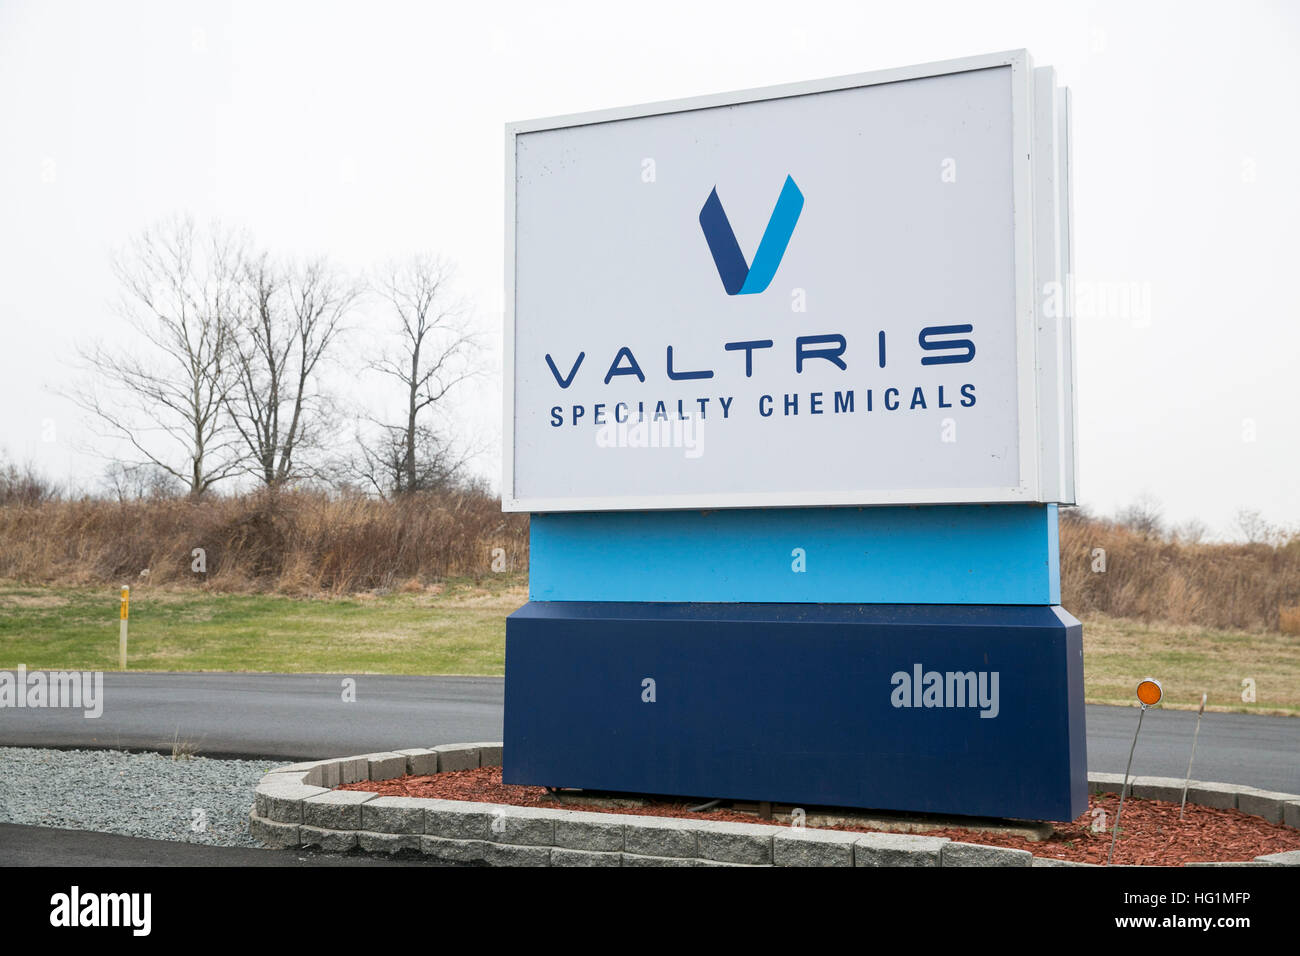 A logo sign outside of a facility occupied by Valtris Specialty Chemicals in Swedesboro, New Jersey on December 11, 2016. Stock Photo